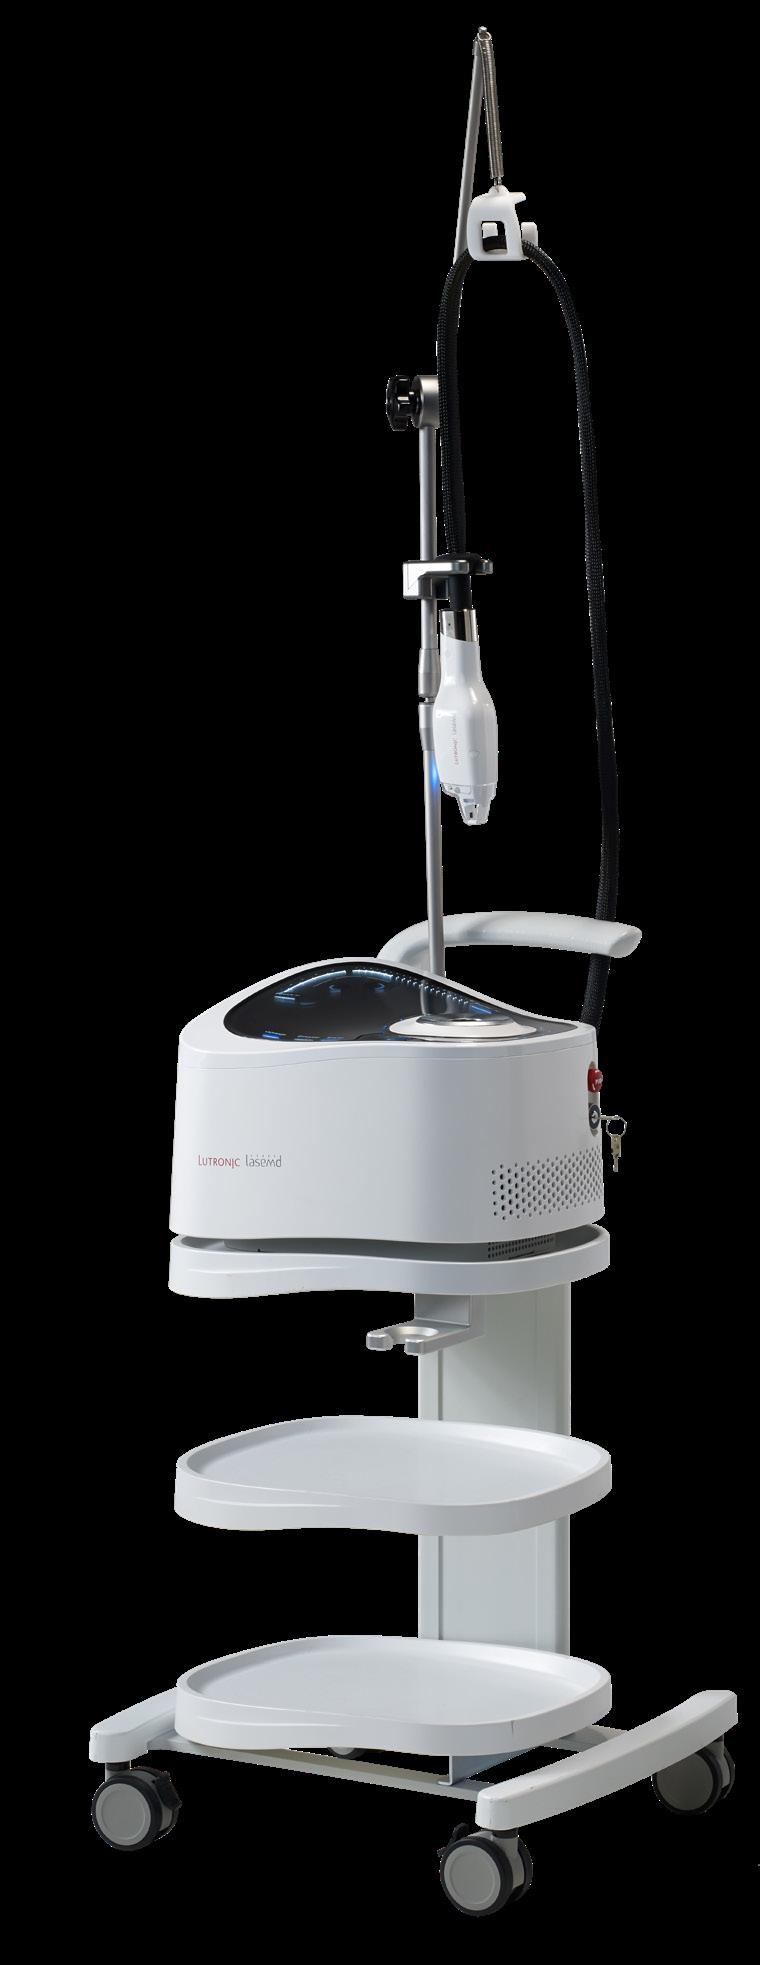 LaseMD's magnetic tracking system enables fast, consistent treatments